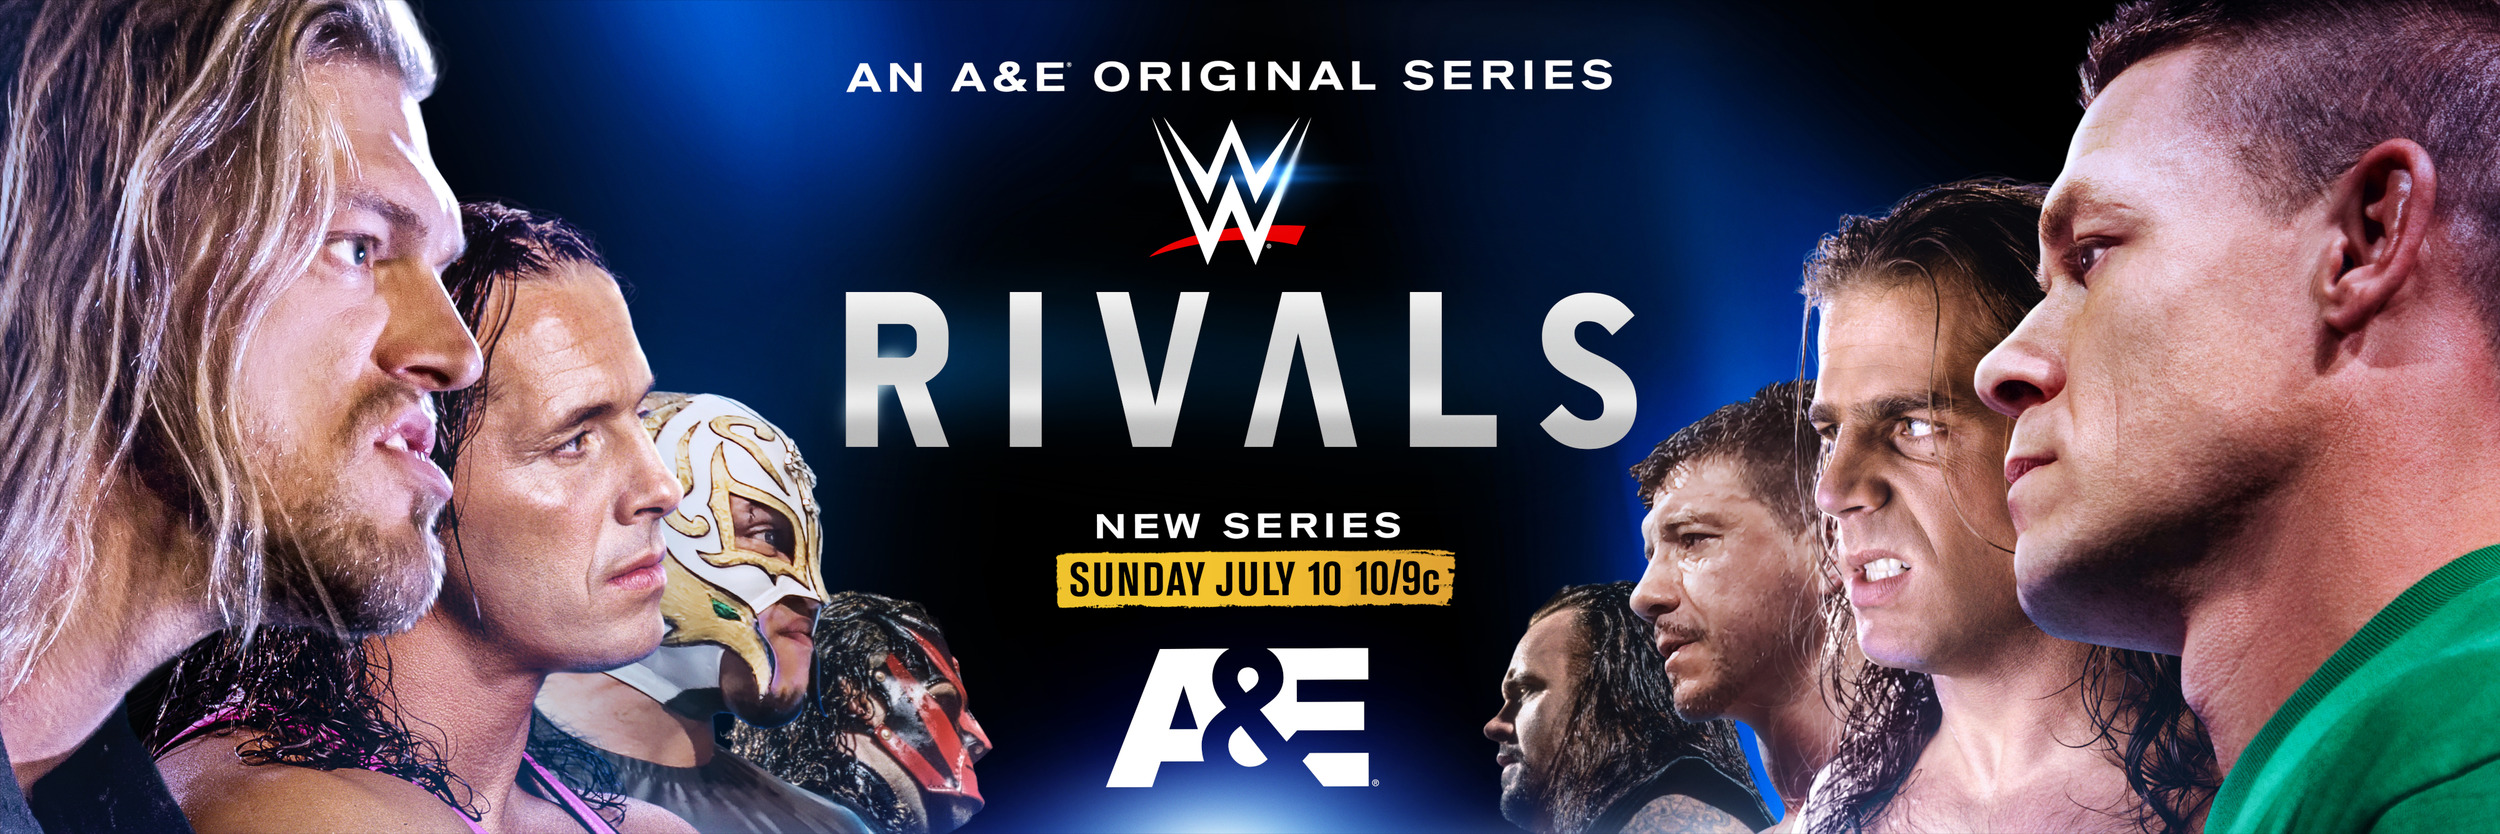 Mega Sized TV Poster Image for WWE Rivals (#2 of 6)